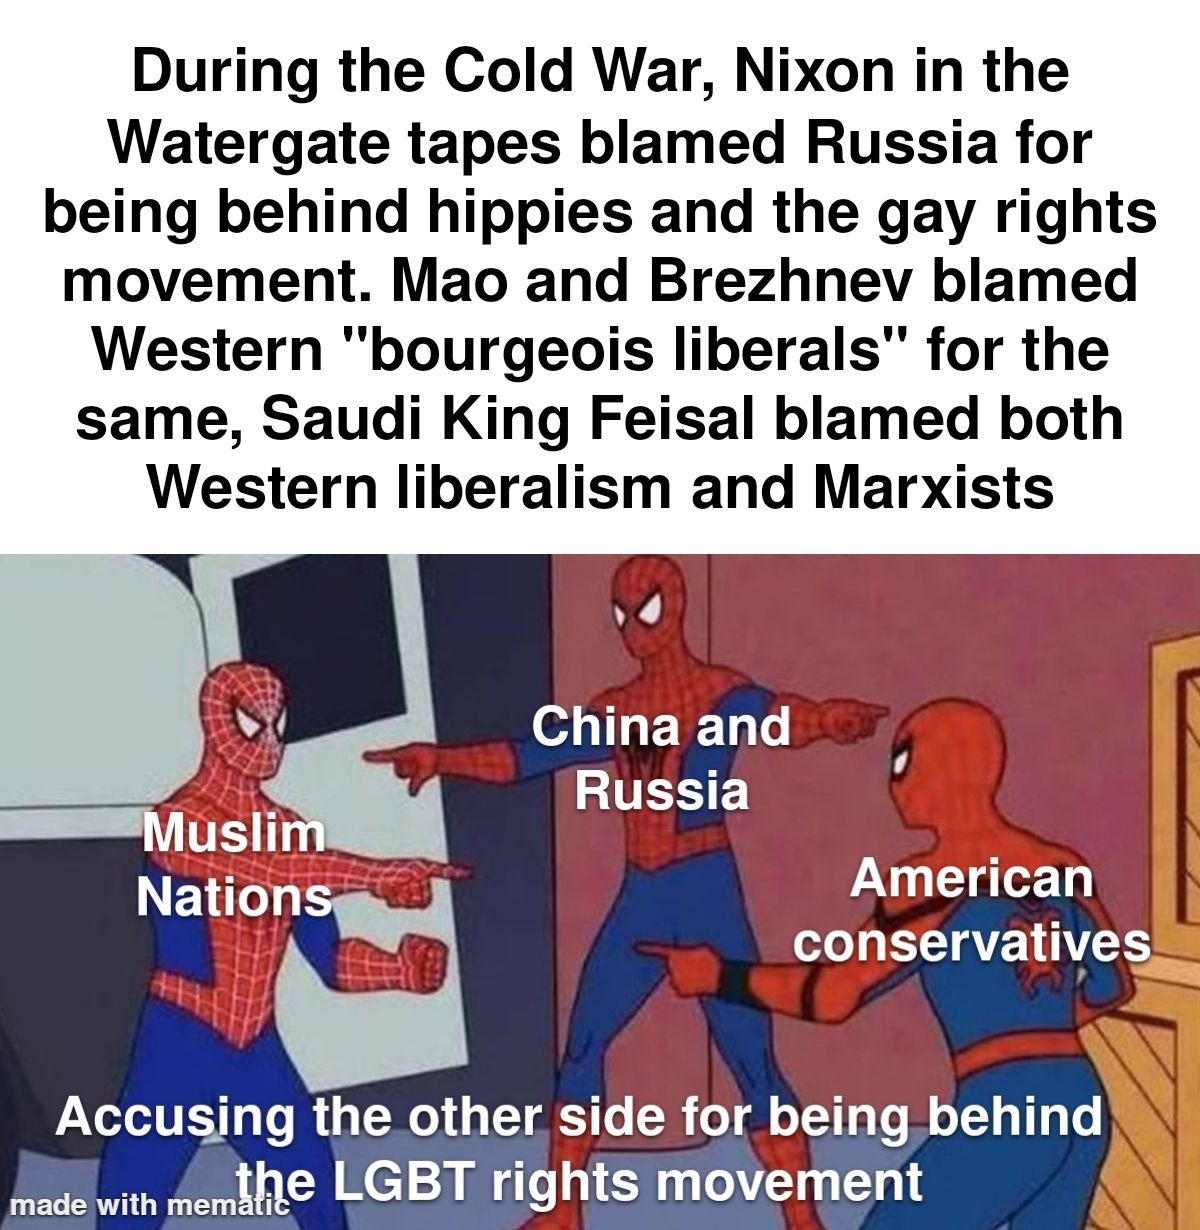 During the Cold War, everyone blamed everyone else for the gay rights movement